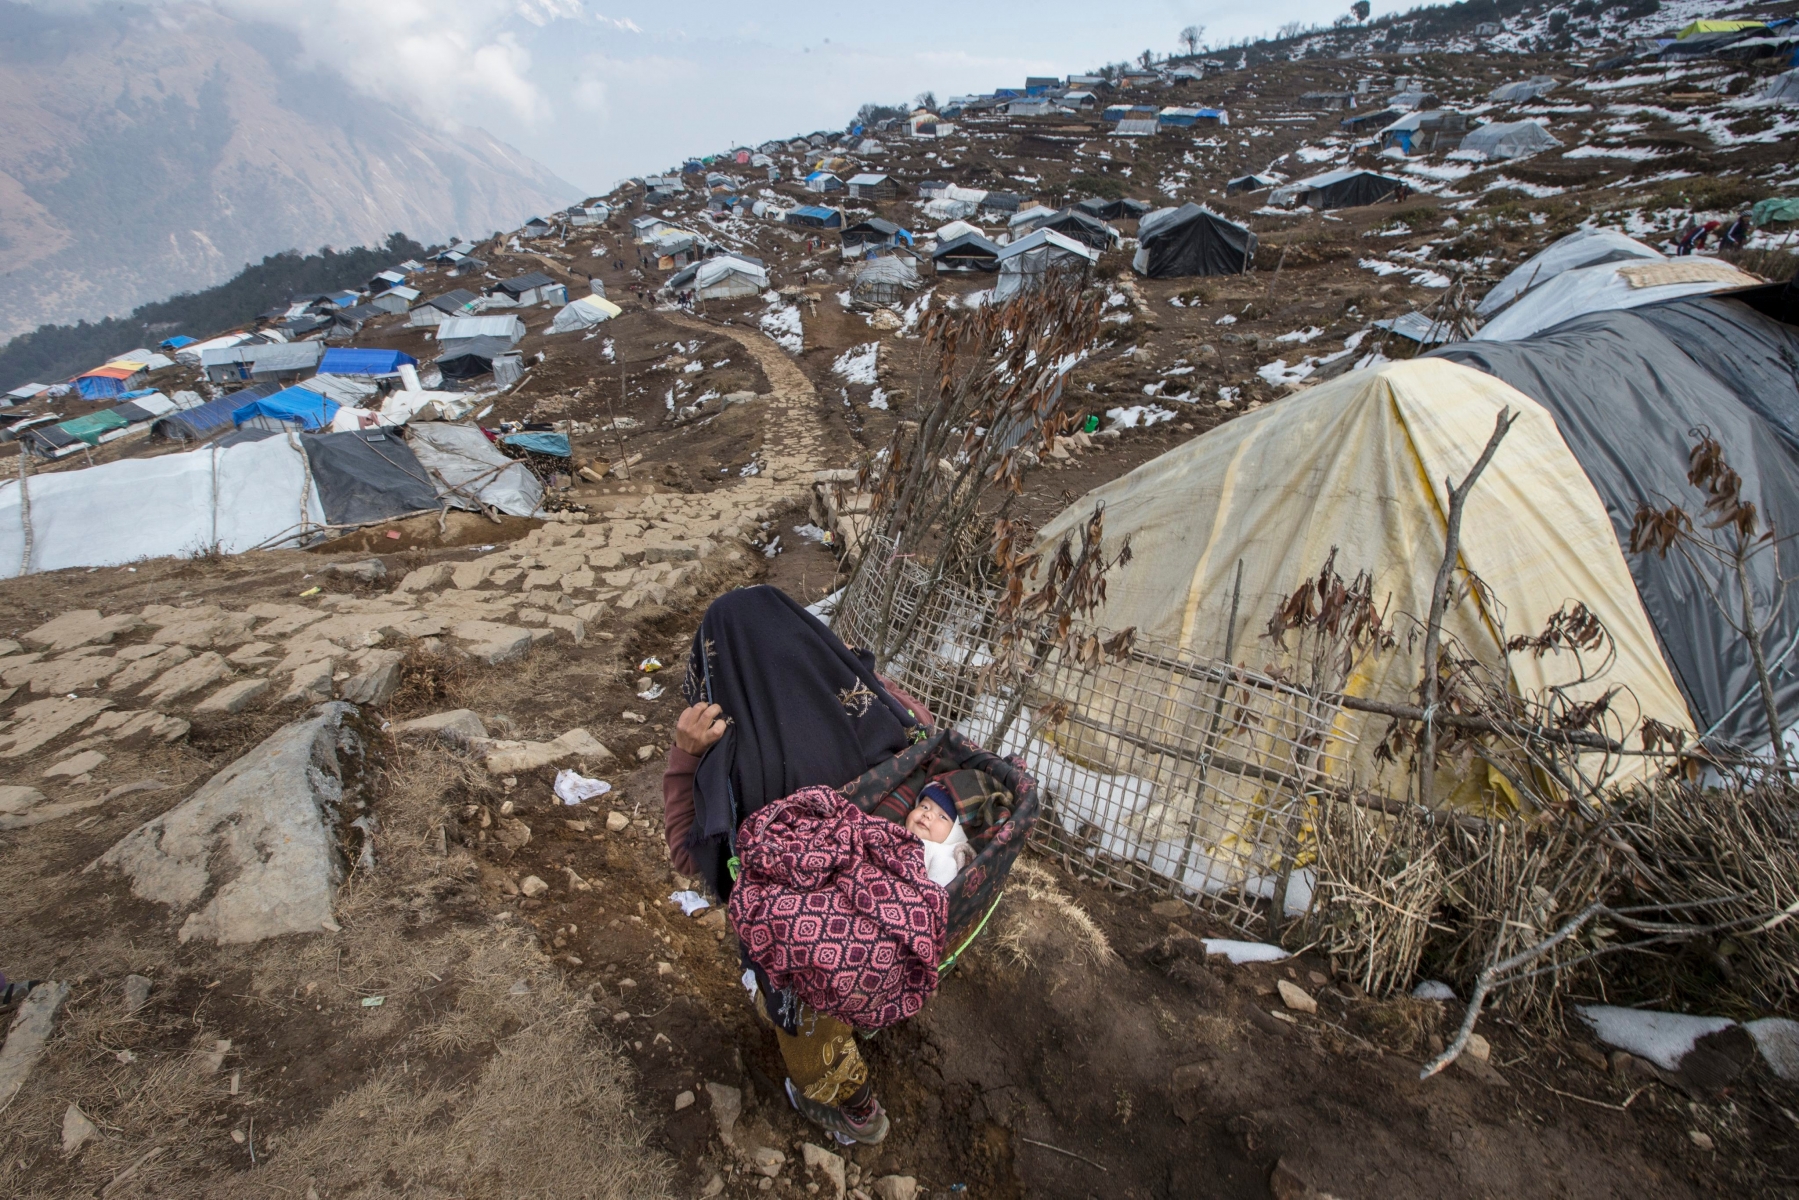 epa05247234 (02/45) A mother carries her son on a basket after a snowfall outside the shelter for earthquake victims in Gupsipakha, Laprak, Gorkha district, Nepal, 17 January 2016. Laprak was one of the epicenter villages of the April 2015 earthquake where more than 600 hundred houses were destroyed. Millions of Nepalese are still struggling with the harsh reality of 25 April 2015 when a 7.9-magnitude earthquake struck the nation. It killed more than 9,000 people, injured at least 23,000, wiped out 200,000 homes, 20,000 schools and destroyed more than 700 monuments.  EPA/NARENDRA SHRESTHA PLEASE REFER TO ADVISORY NOTICE (epa05247232) FOR FULL FEATURE TEXT NEPAL FEATURE PACKAGE REBUILDING AFTER EARTHQUAKE